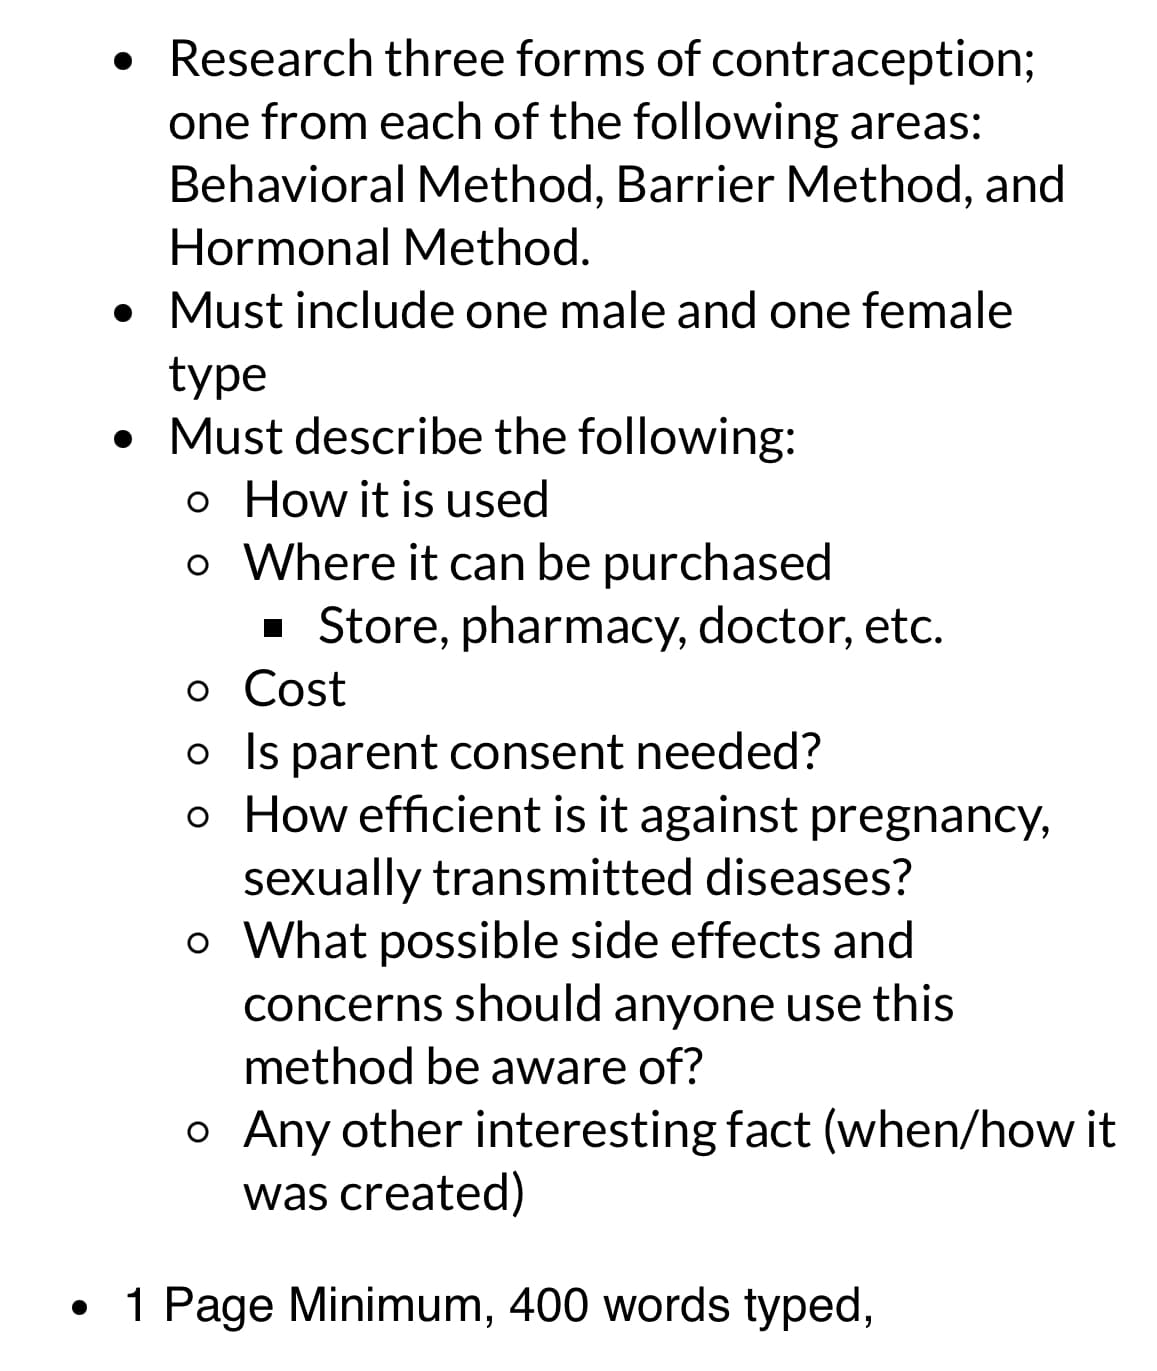 • Research three forms of contraception;
one from each of the following areas:
Behavioral Method, Barrier Method, and
Hormonal Method.
• Must include one male and one female
type
• Must describe the following:
。 How it is used
。 Where it can be purchased
■ Store, pharmacy, doctor, etc.
。 Cost
o Is parent consent needed?
。 How efficient is it against pregnancy,
sexually transmitted diseases?
。 What possible side effects and
concerns should anyone use this
method be aware of?
。 Any other interesting fact (when/how it
was created)
•
1 Page Minimum, 400 words typed,